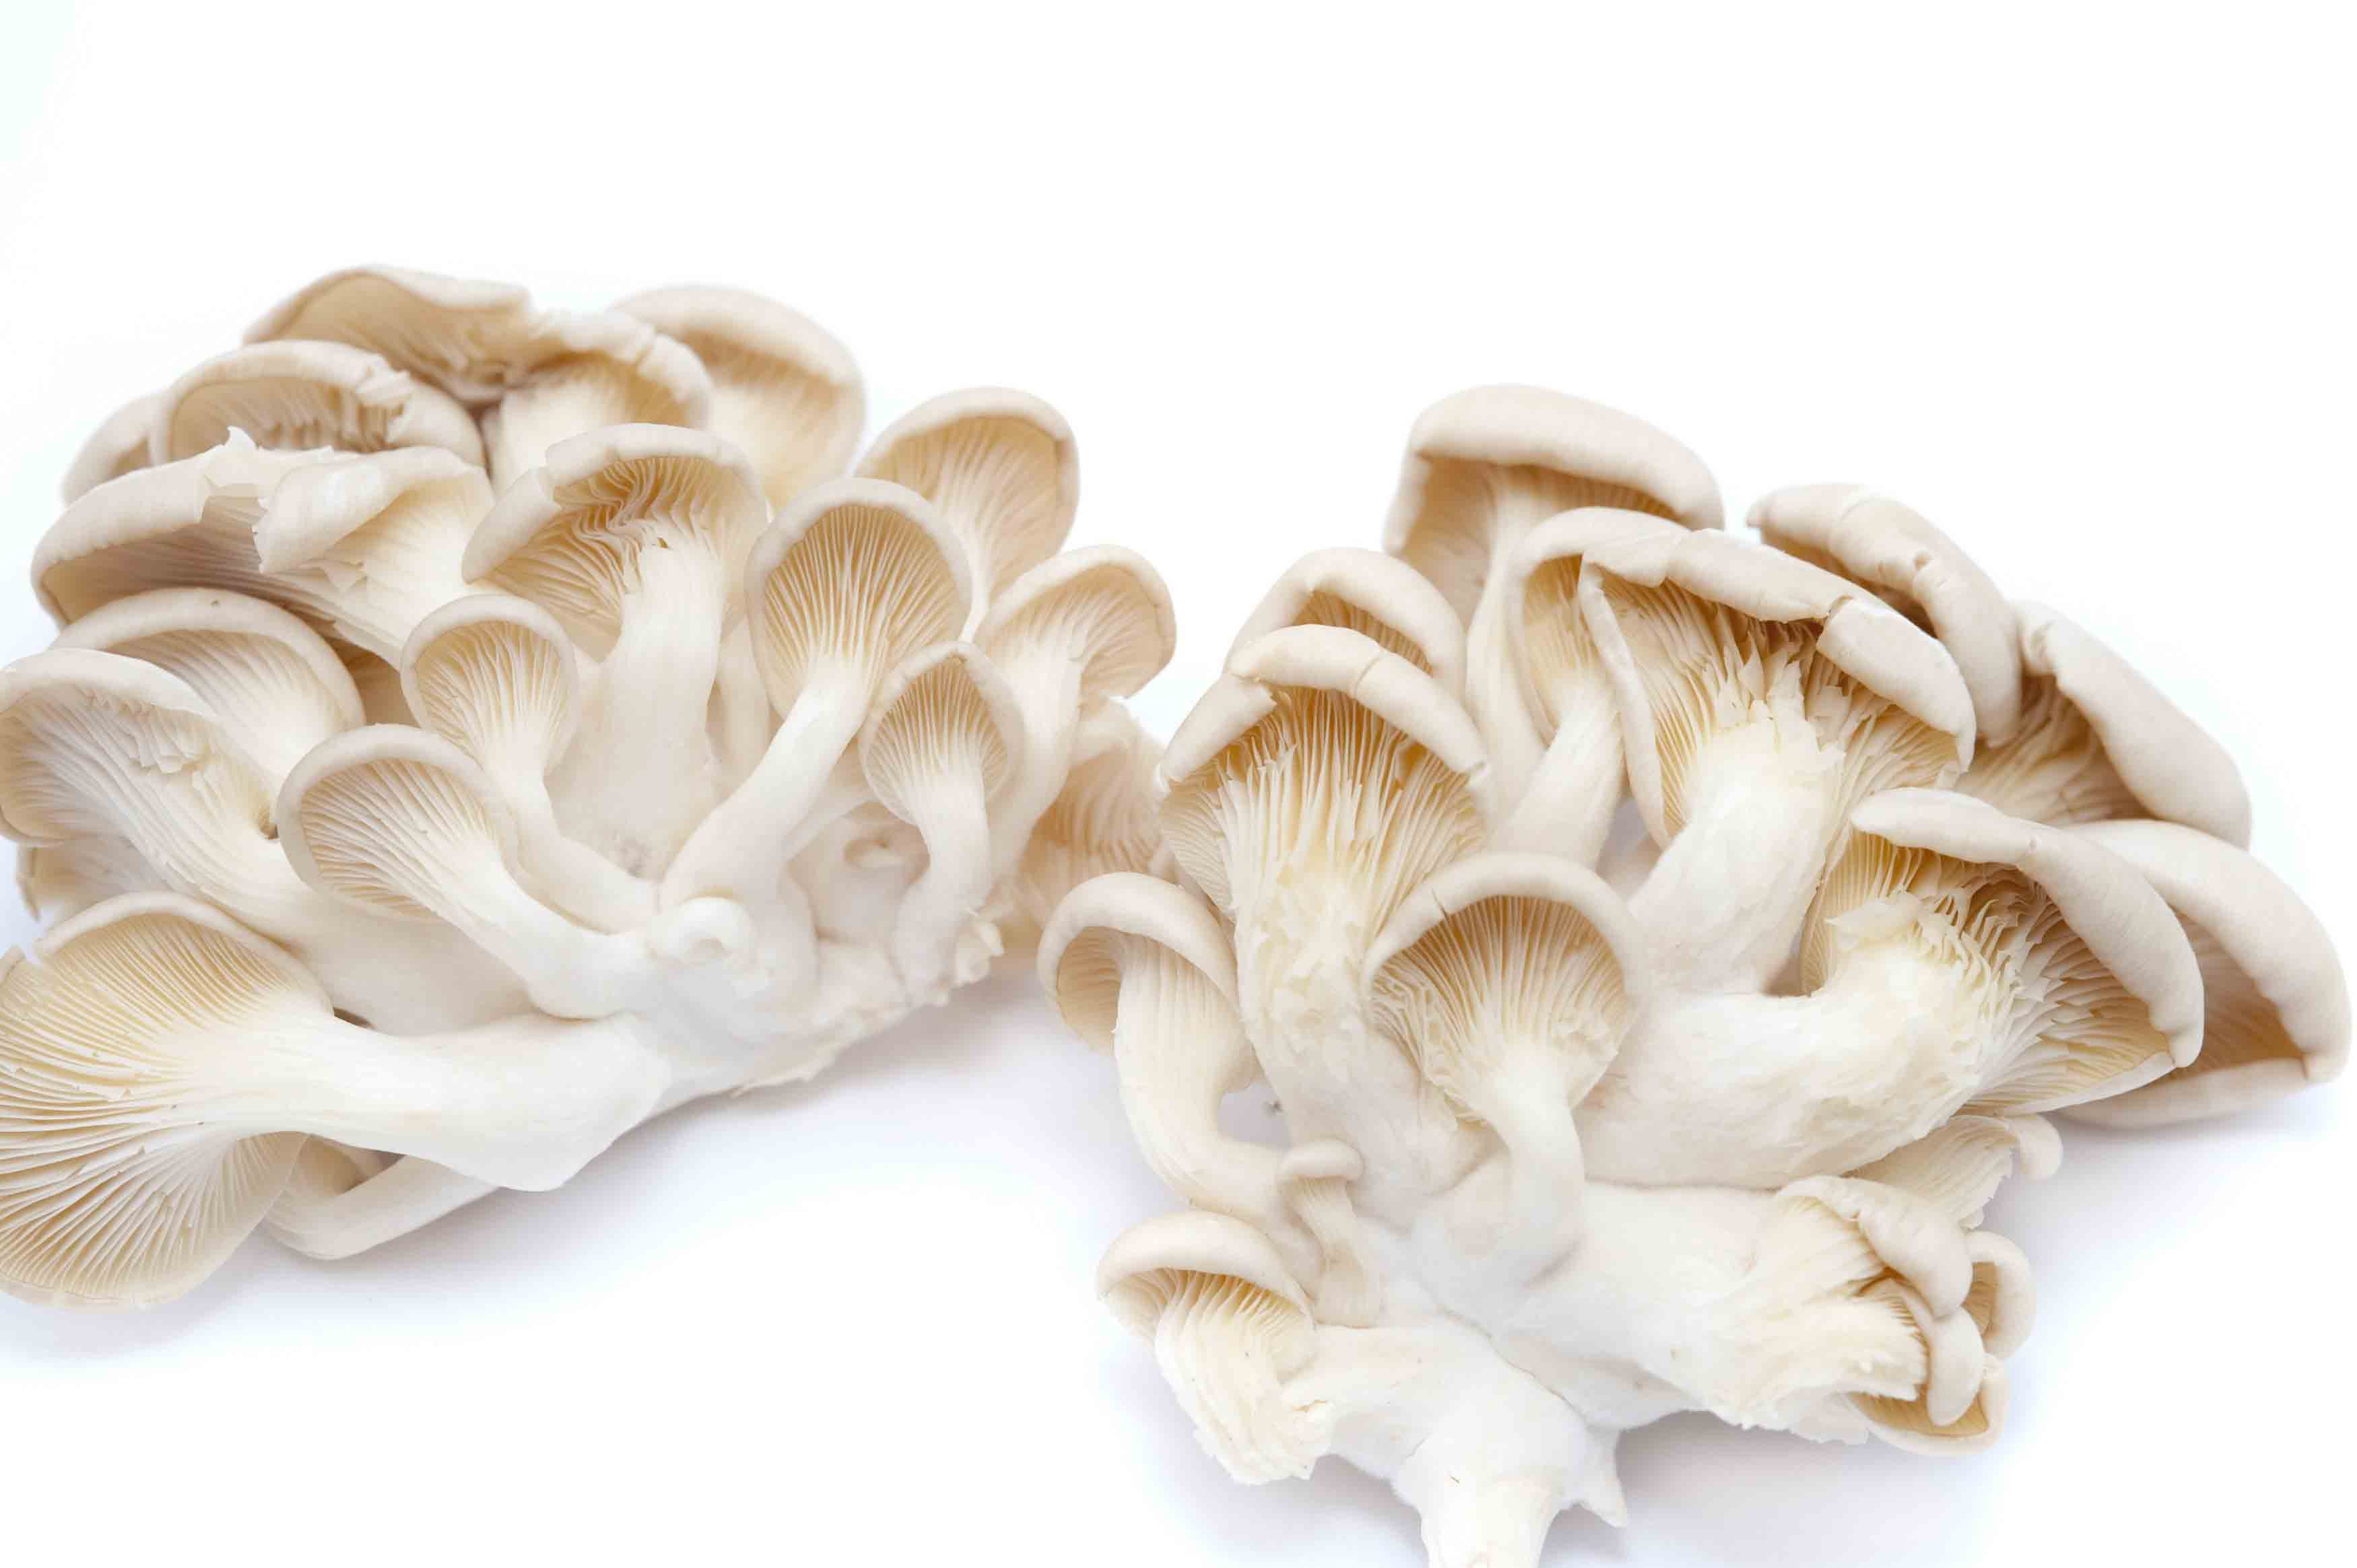 Some Fantastic Health Benefits of Oyster Mushrooms for better living